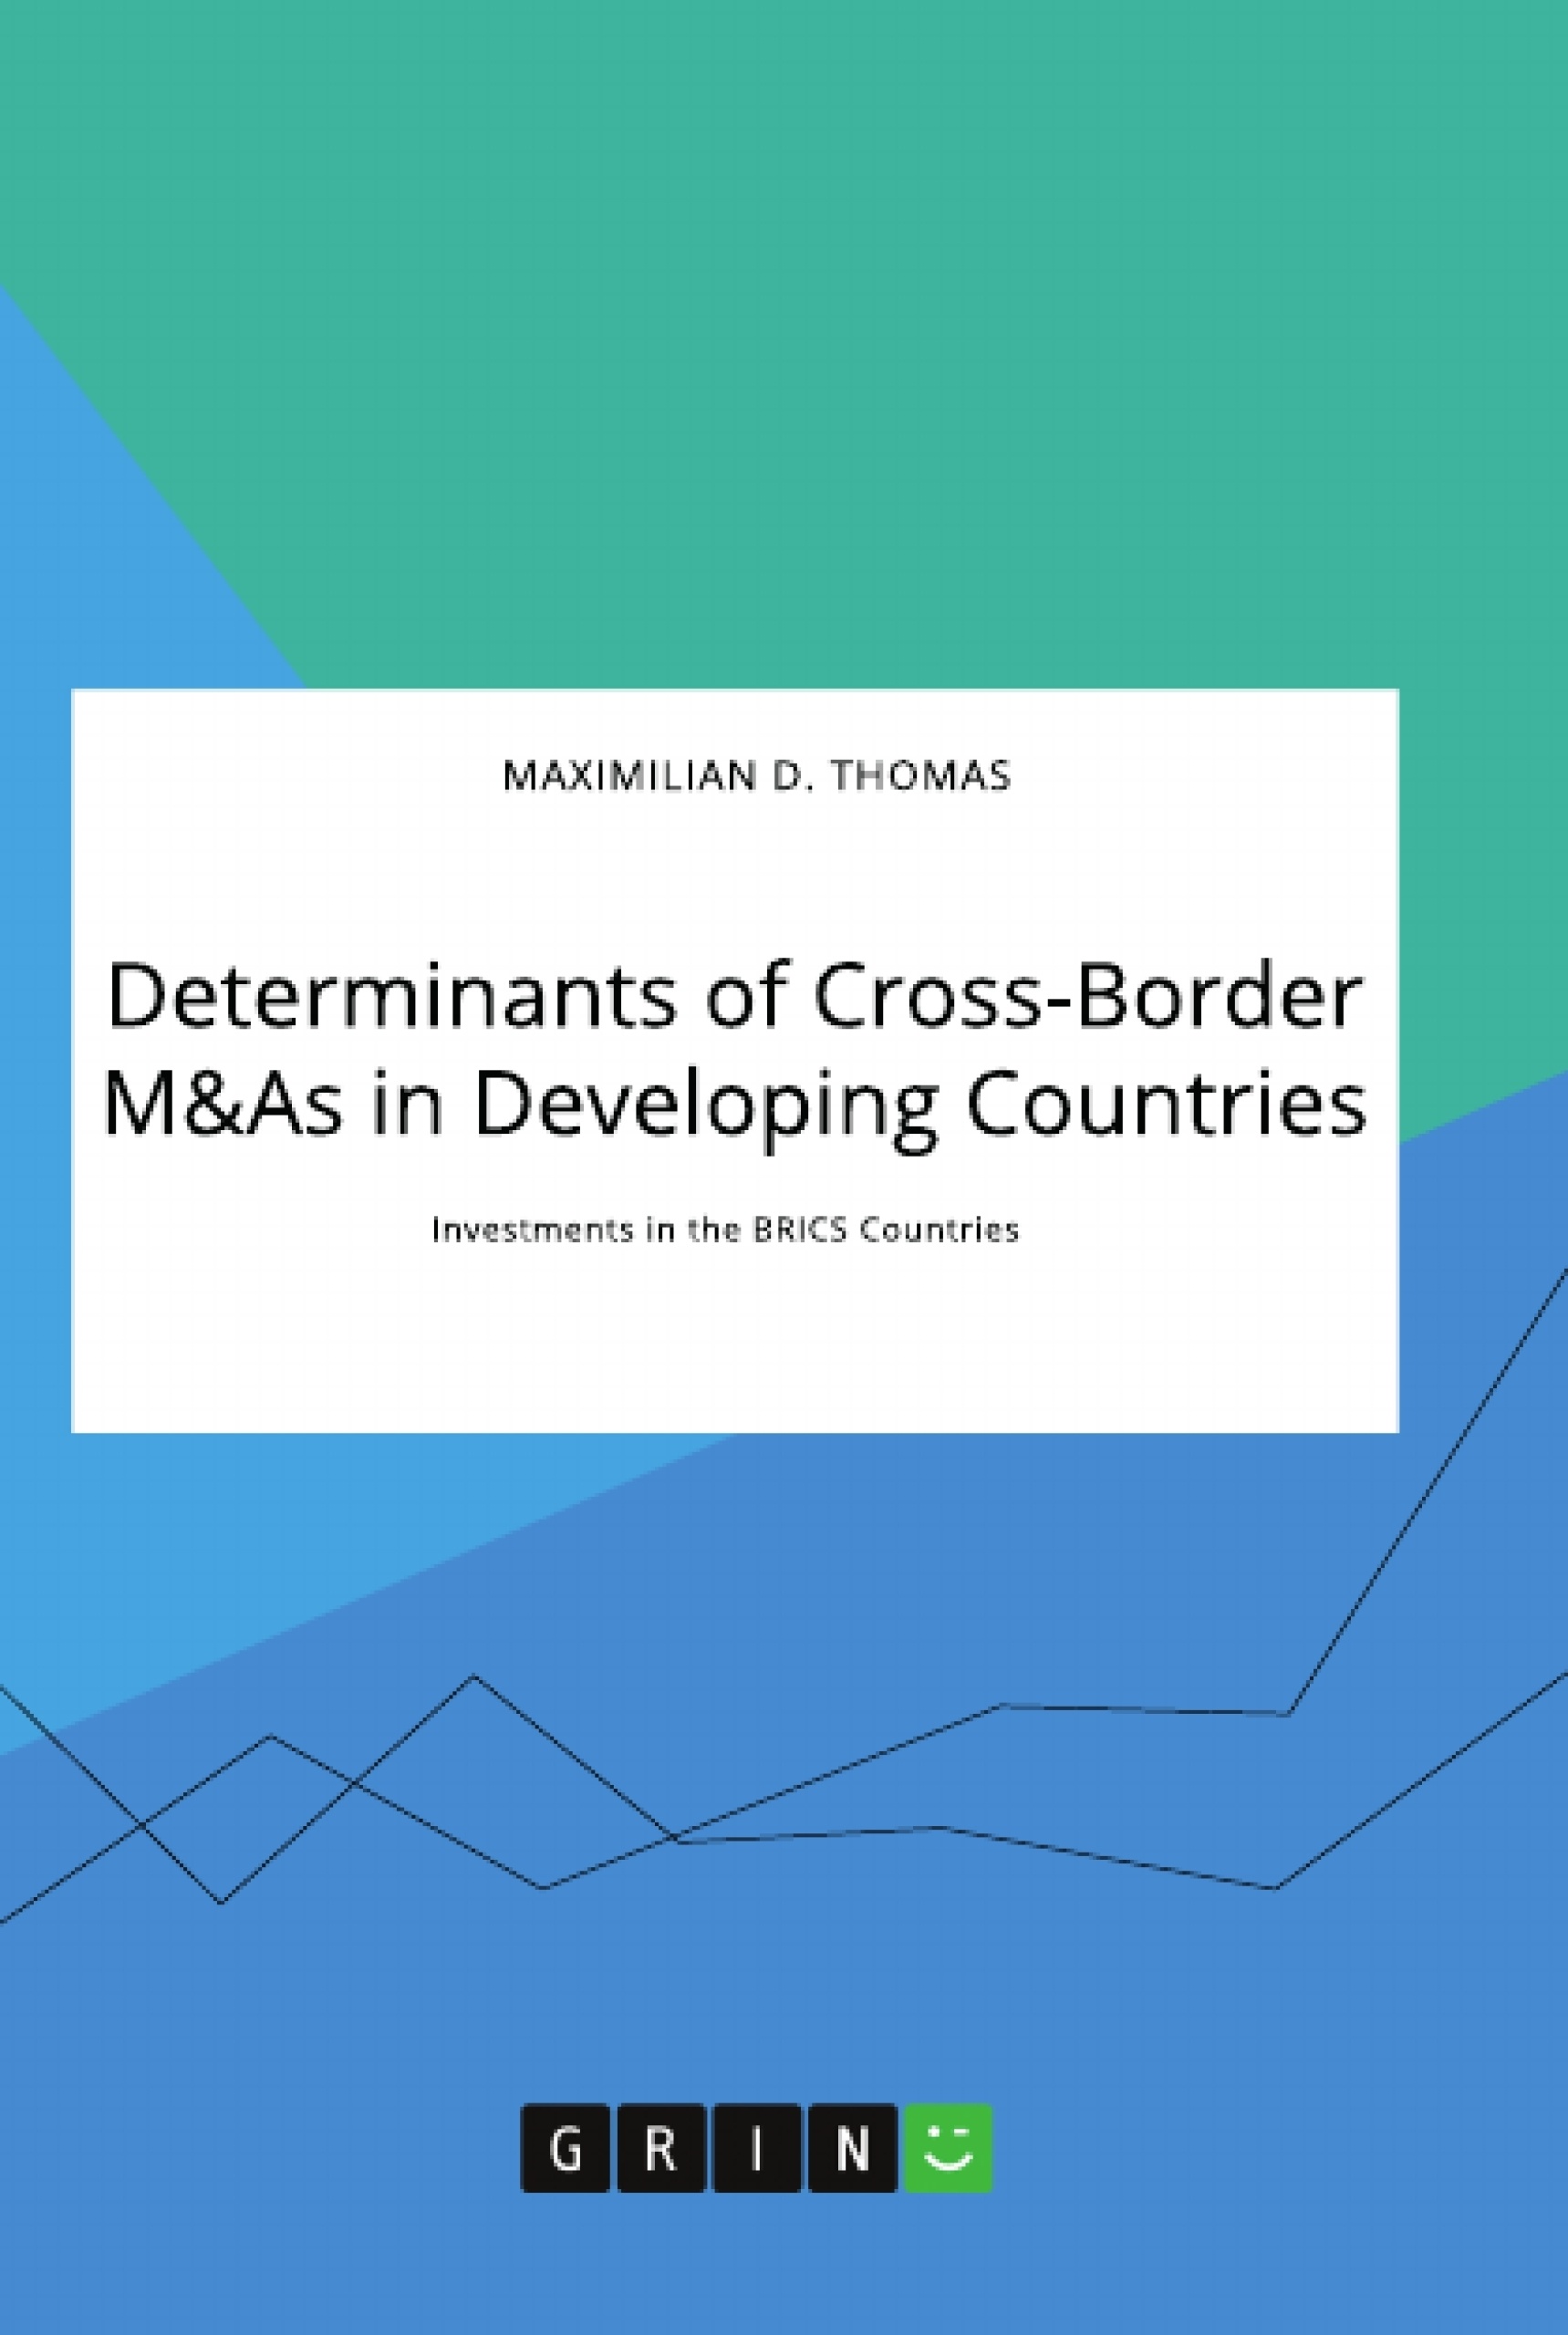 Title: Determinants of Cross-Border M&As in Developing Countries. Investments in the BRICS Countries